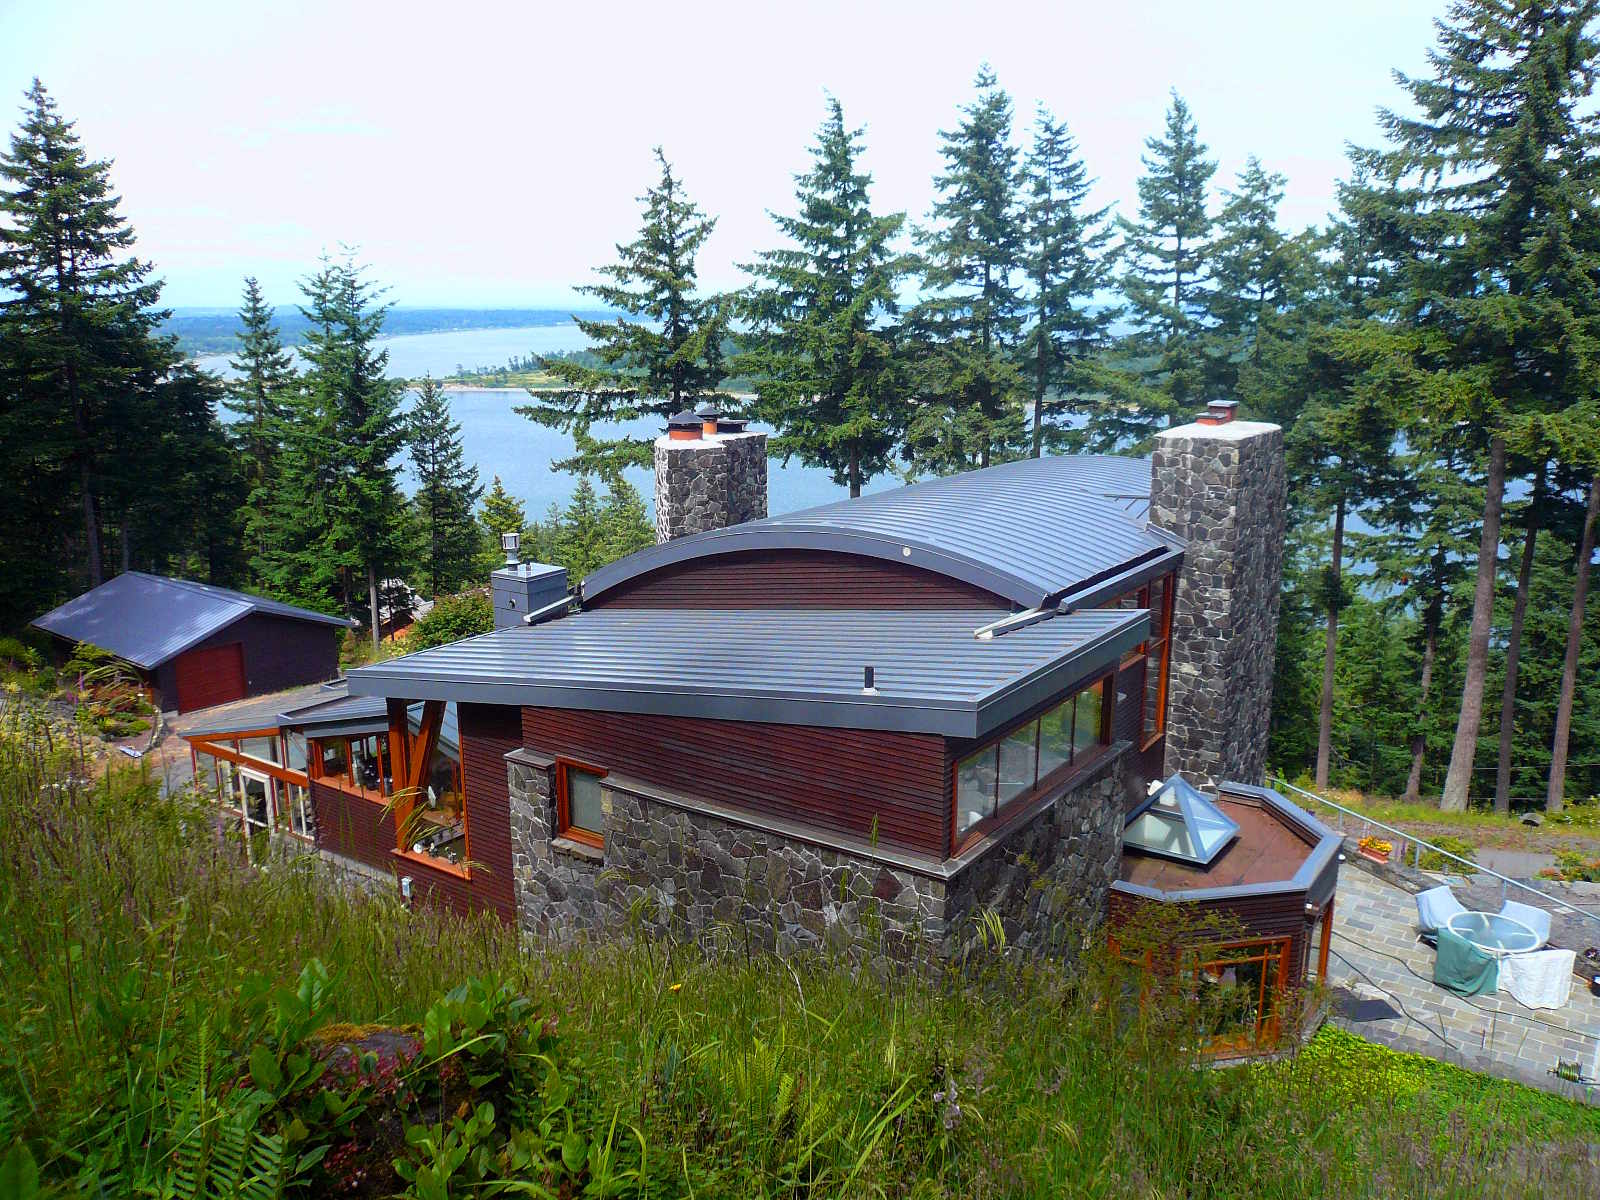 Stone house in the Sn Juan Islands